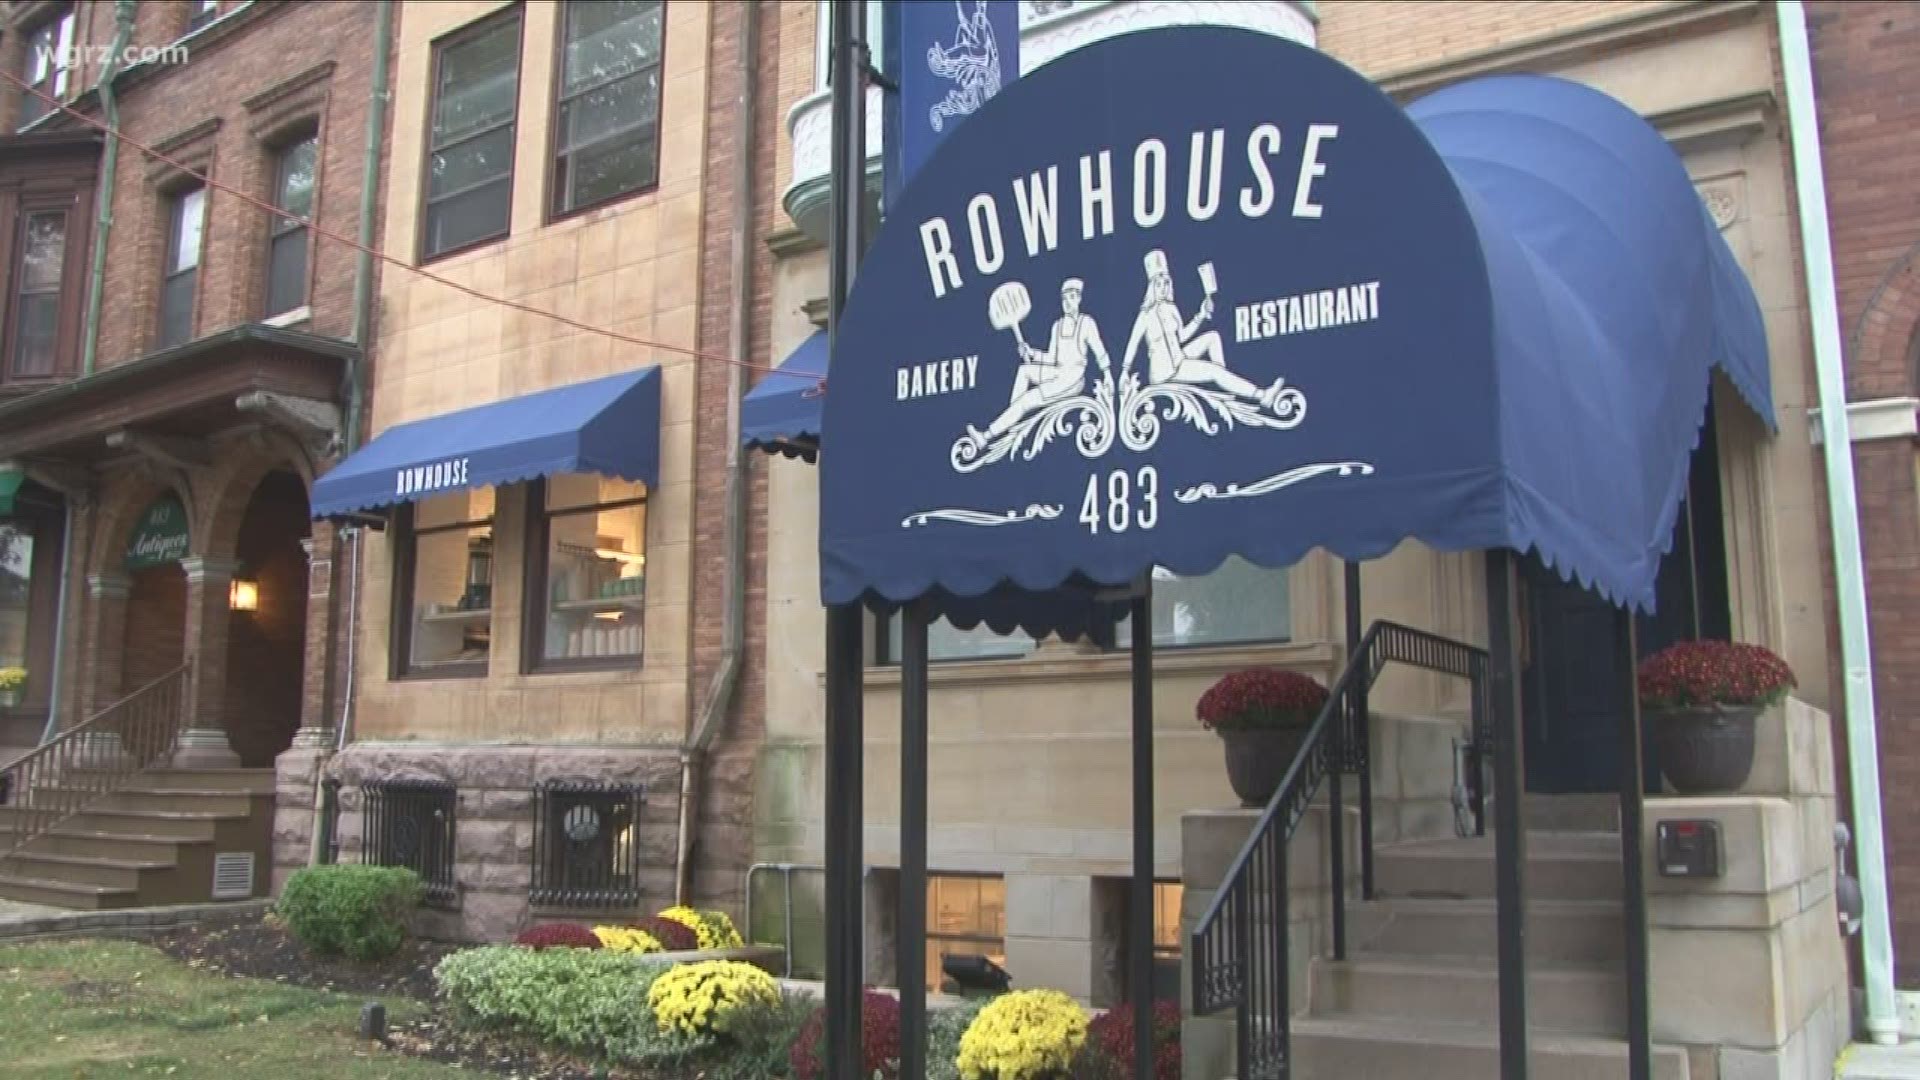 Rowhouse announced in Facebook that it's ending its restaurant hours to focus on special events only...